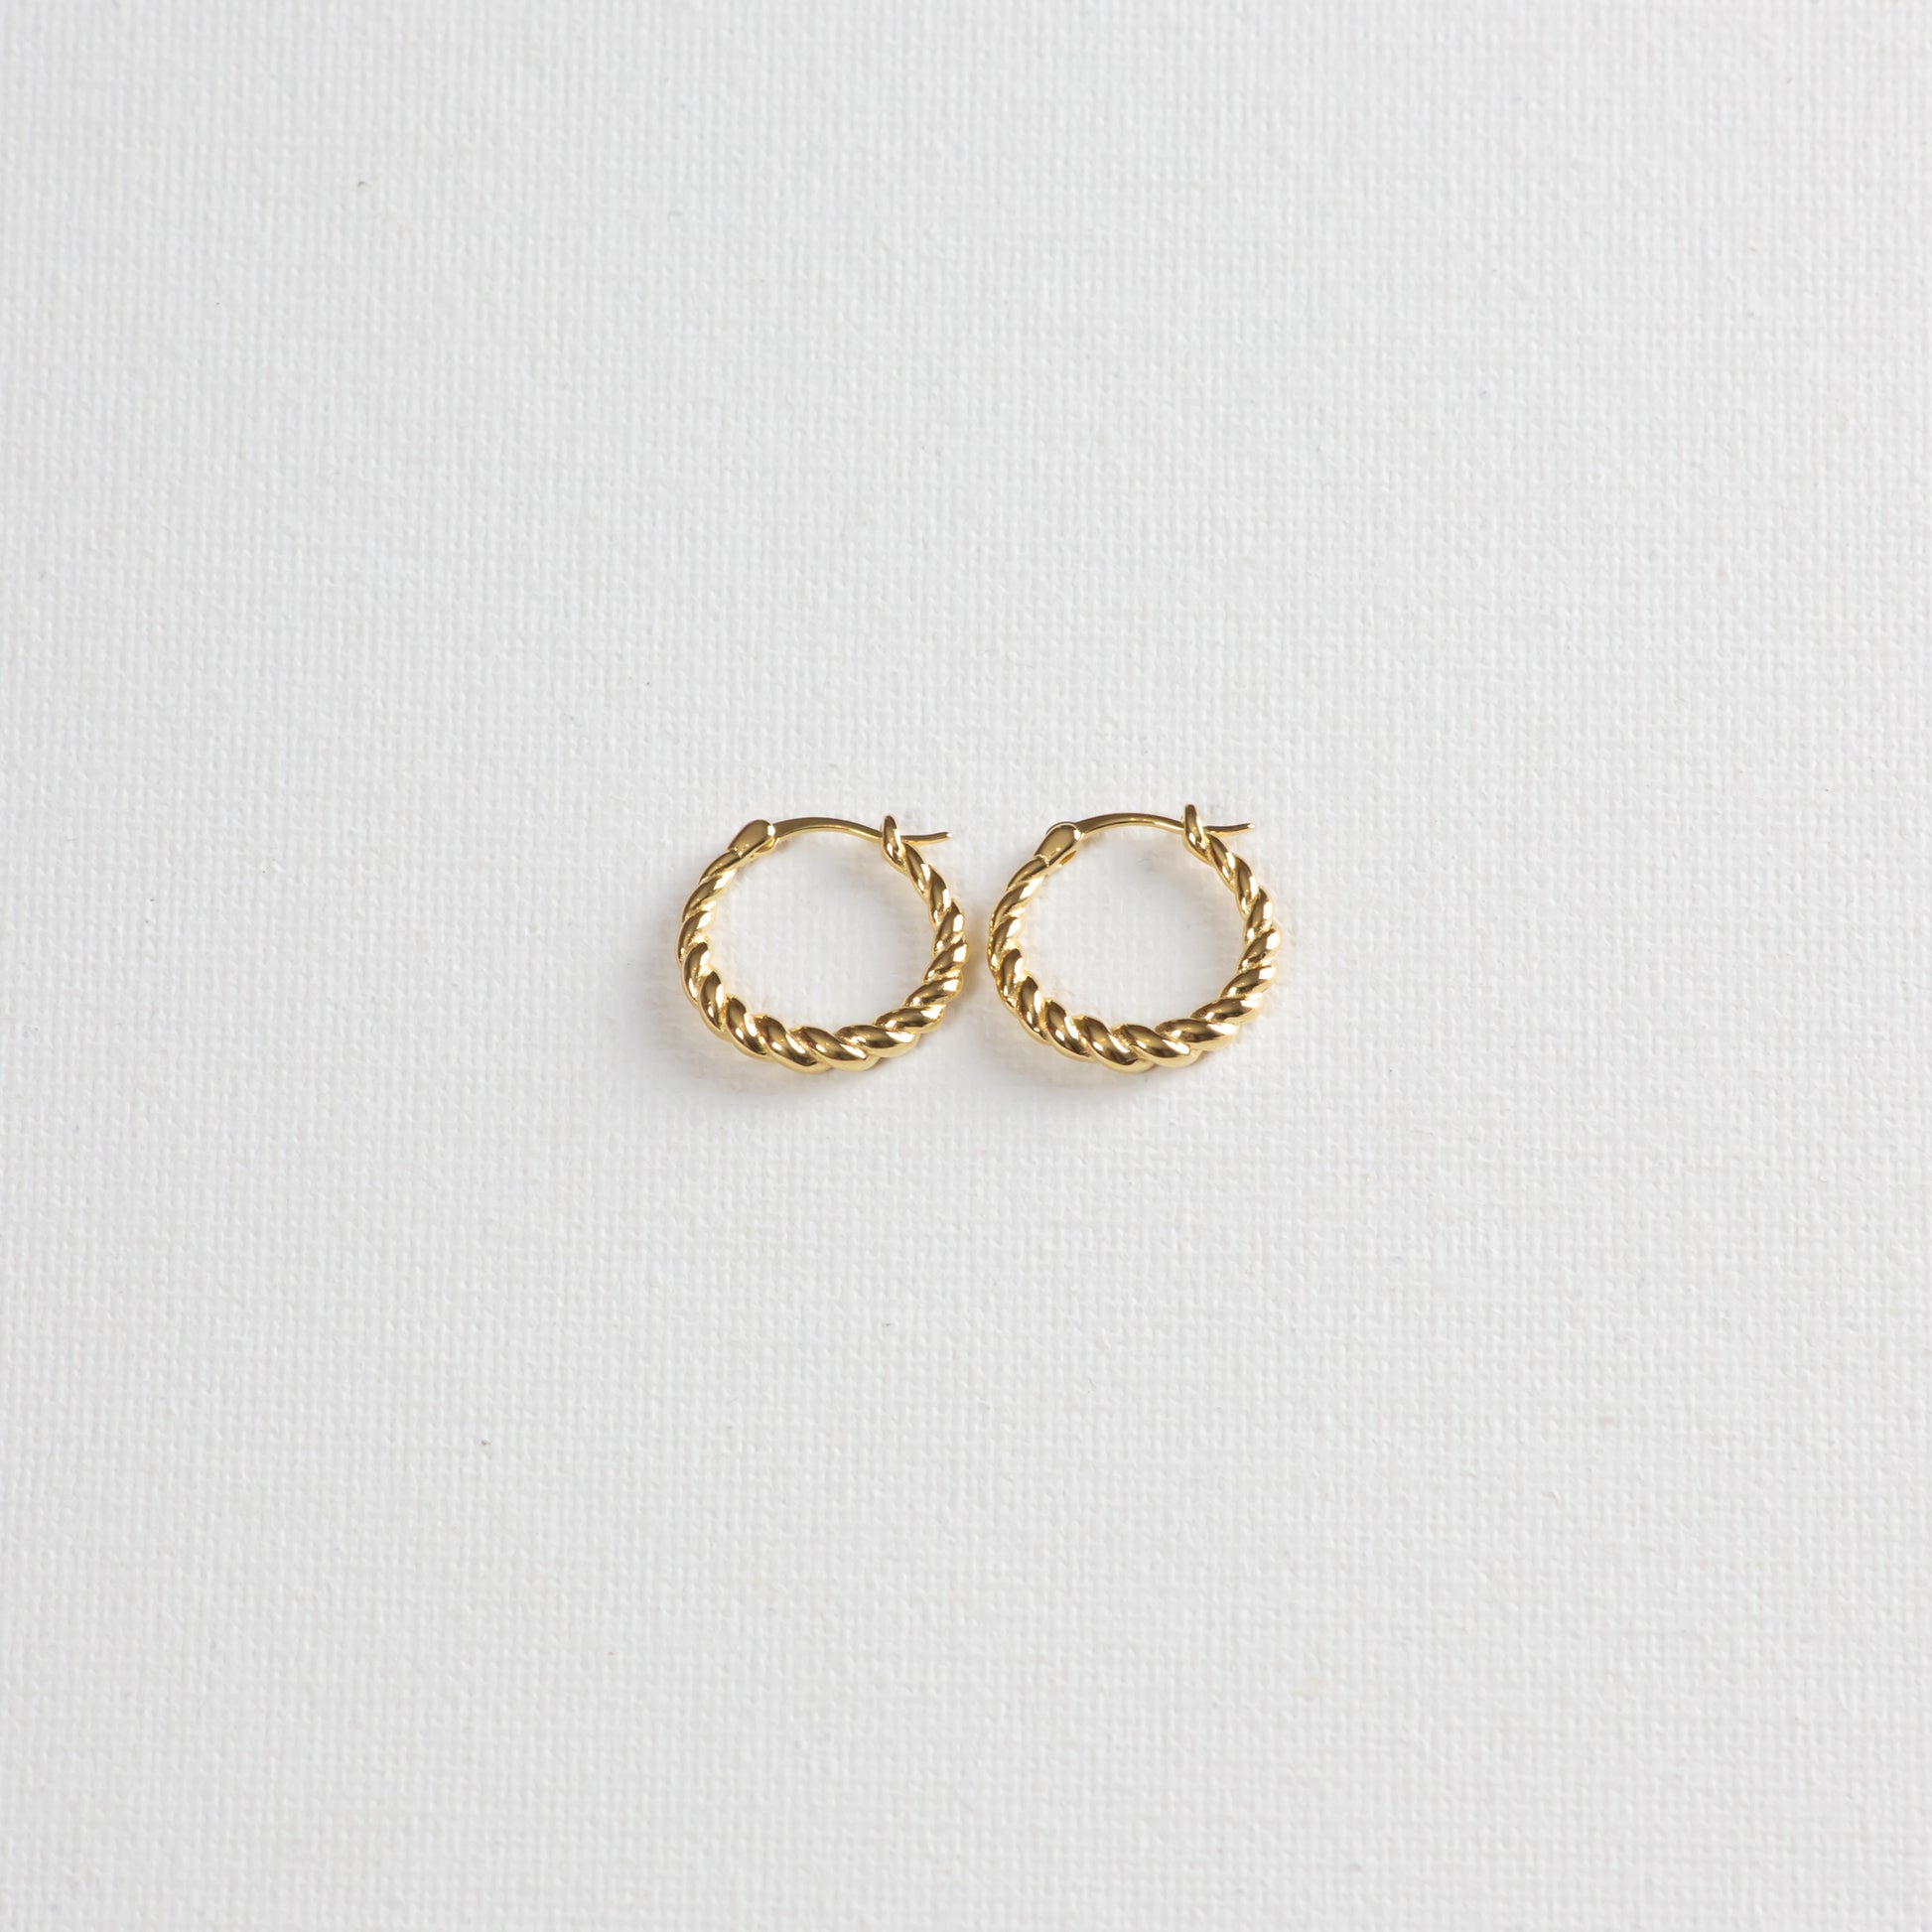 Pasta hoops, gold twisted circular earrings, on a white background. Photographed on a slight angle from the bottom.